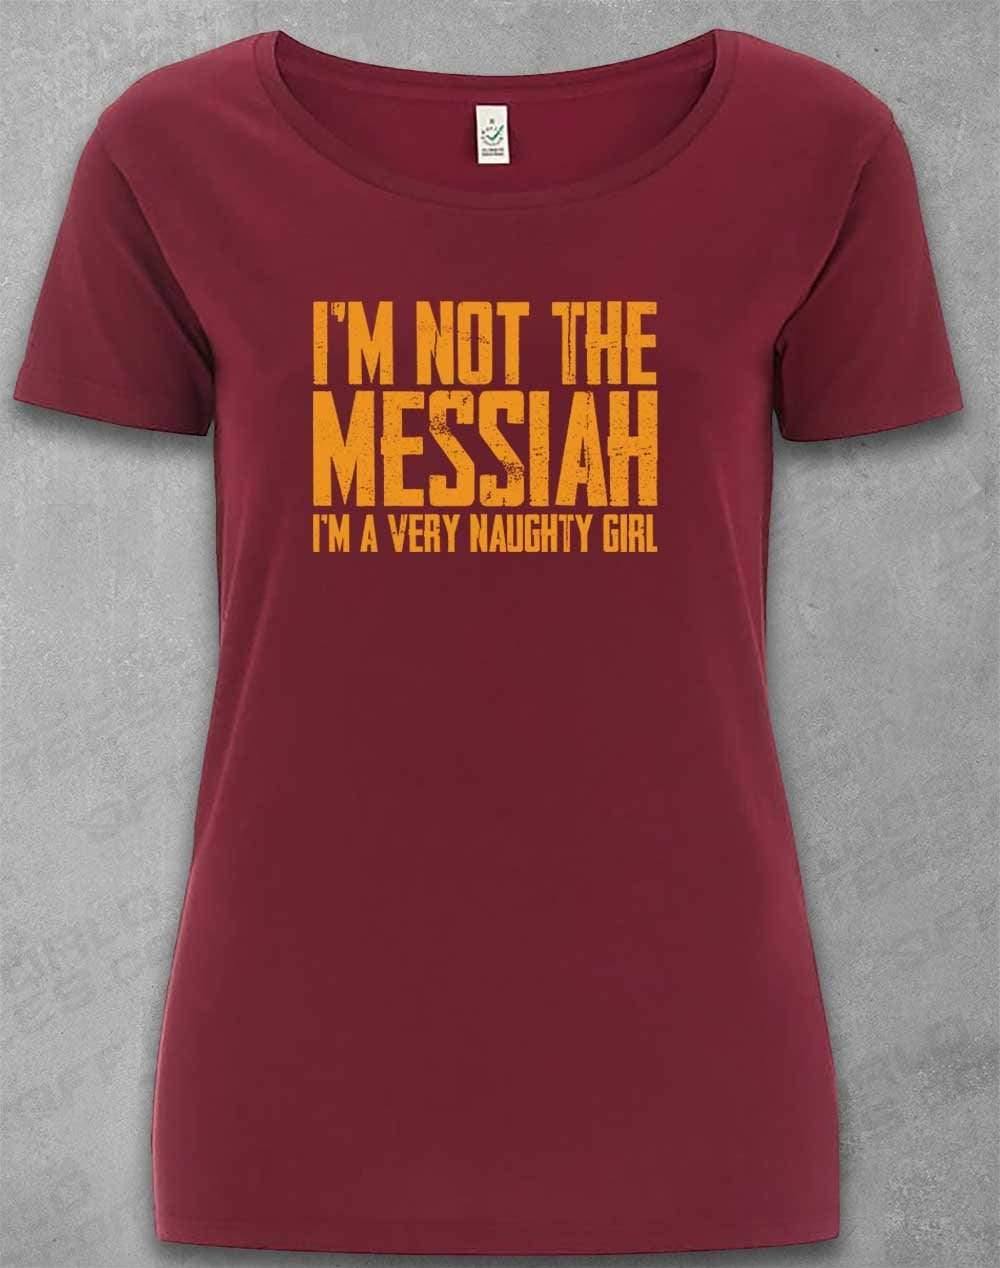 DELUXE I'm Not the Messiah I'm a Very Naughty Girl Organic Scoop Neck T-Shirt 8-10 / Burgundy  - Off World Tees